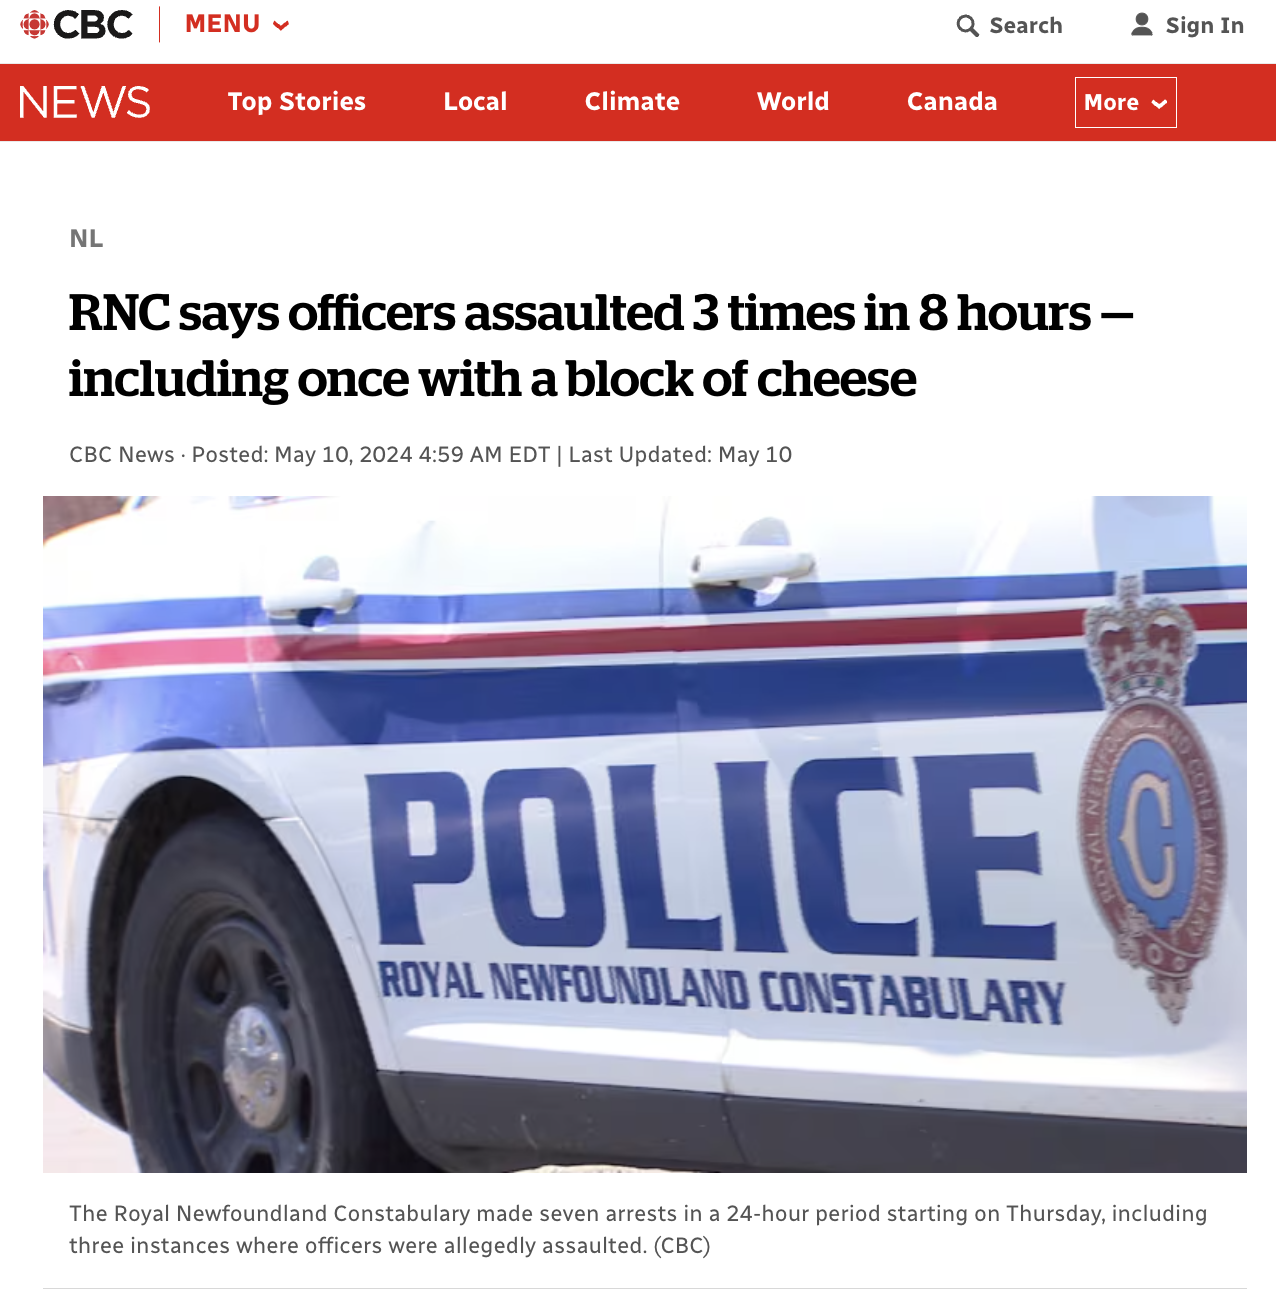 emergency - Menu QSearch News Top Stories Local Climate World Canada More Nl Rnc says officers assaulted 3 times in 8 hours including once with a block of cheese Cbc News Posted Edt | Last Updated May 10 Sign In Police C Royal Newfoundland Constabulary Th